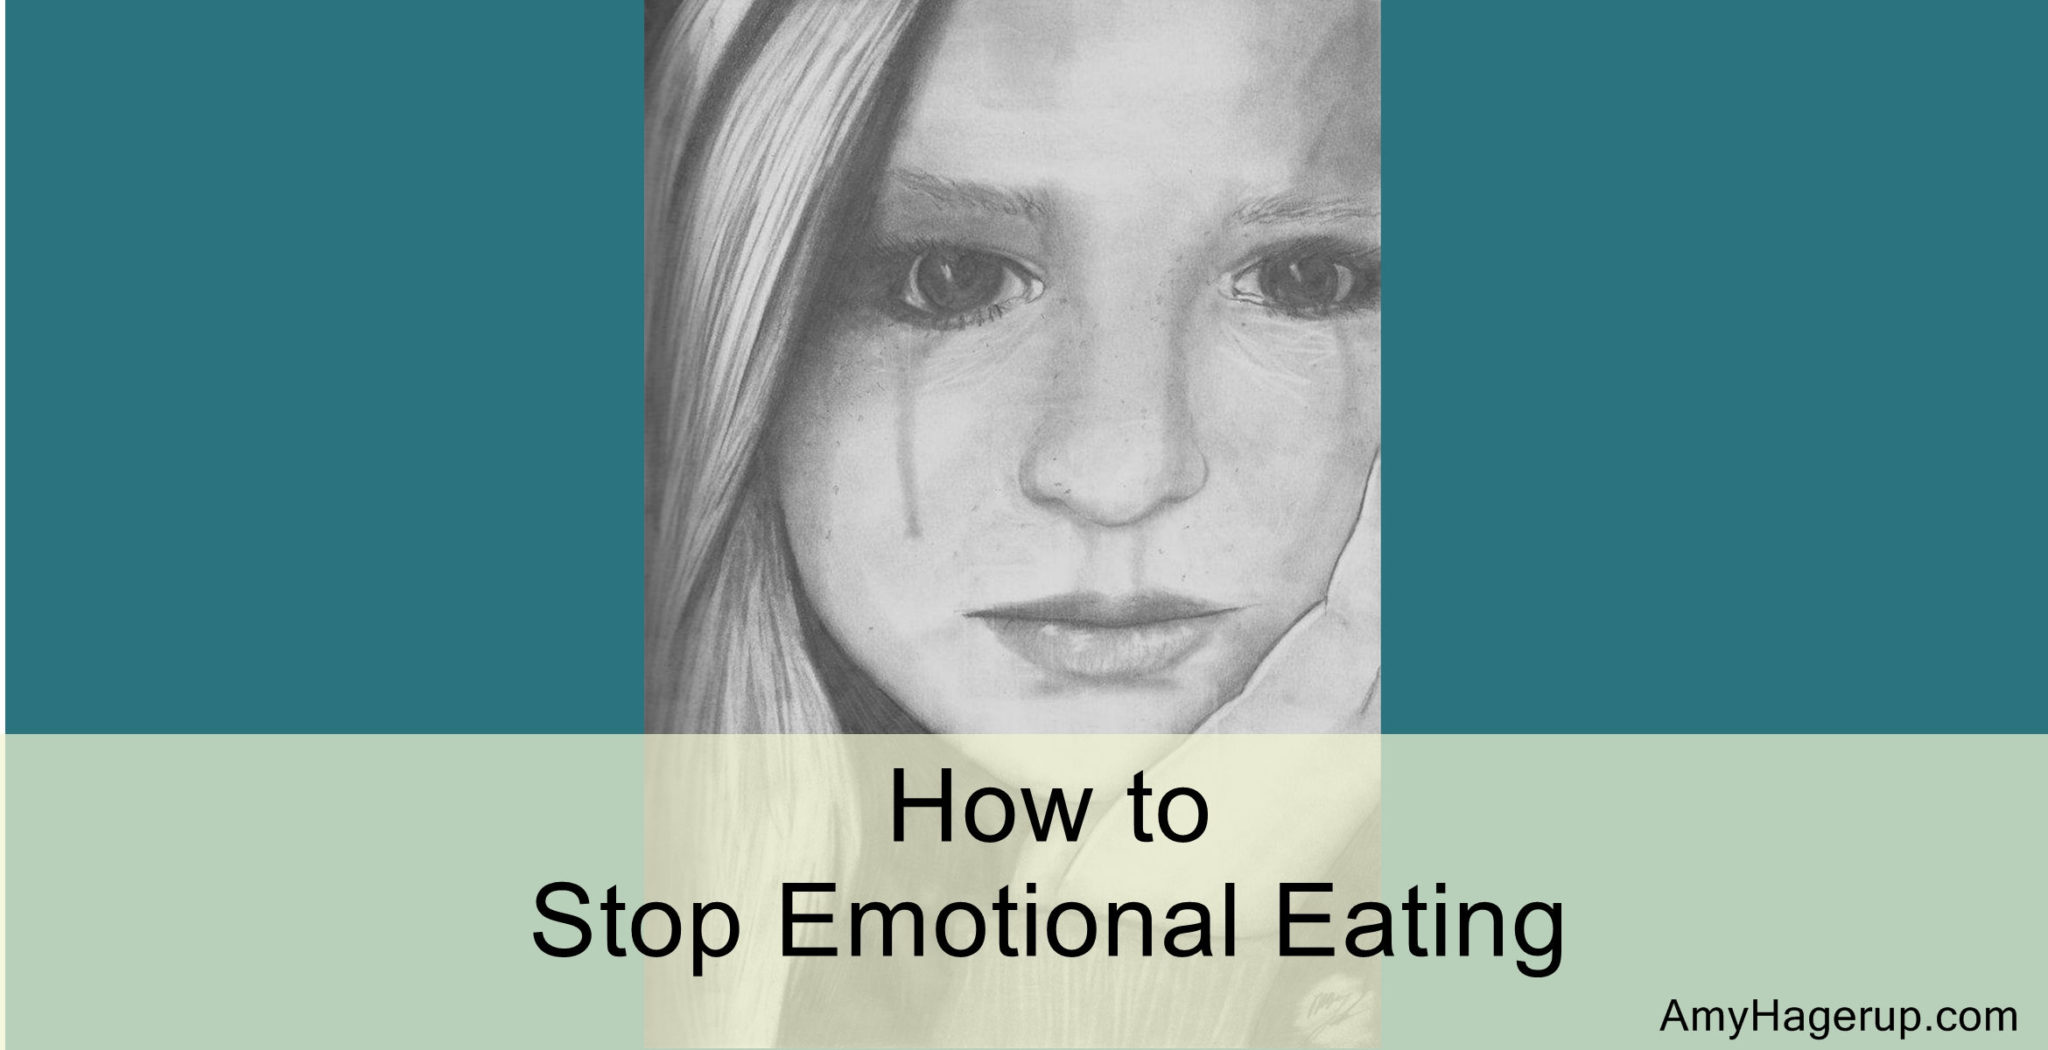 How to stop emotional eating tips